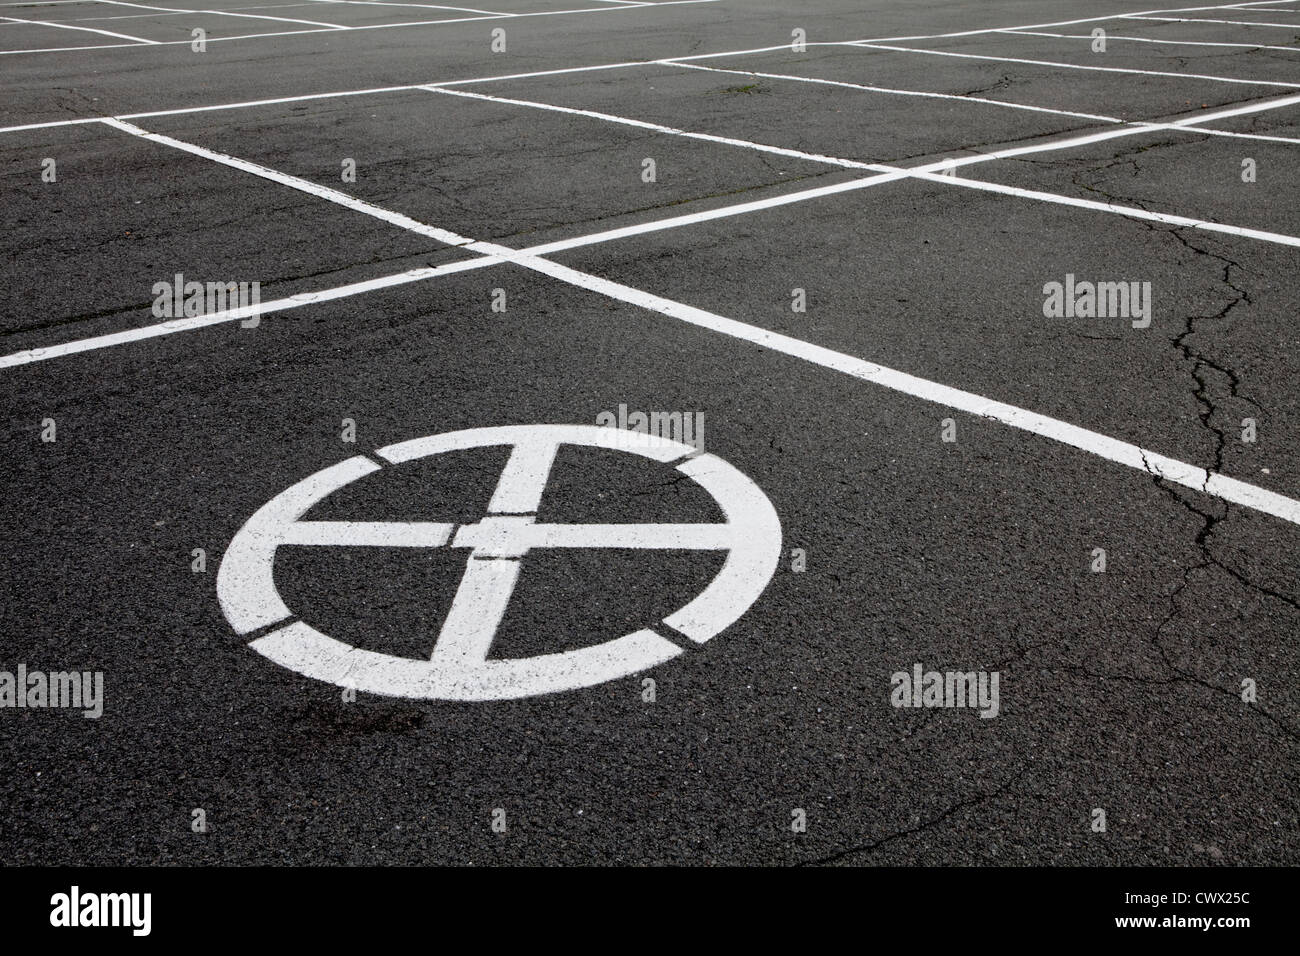 Free parking space with a no parking symbol, concept image, parking spaces, Germany, Europe Stock Photo